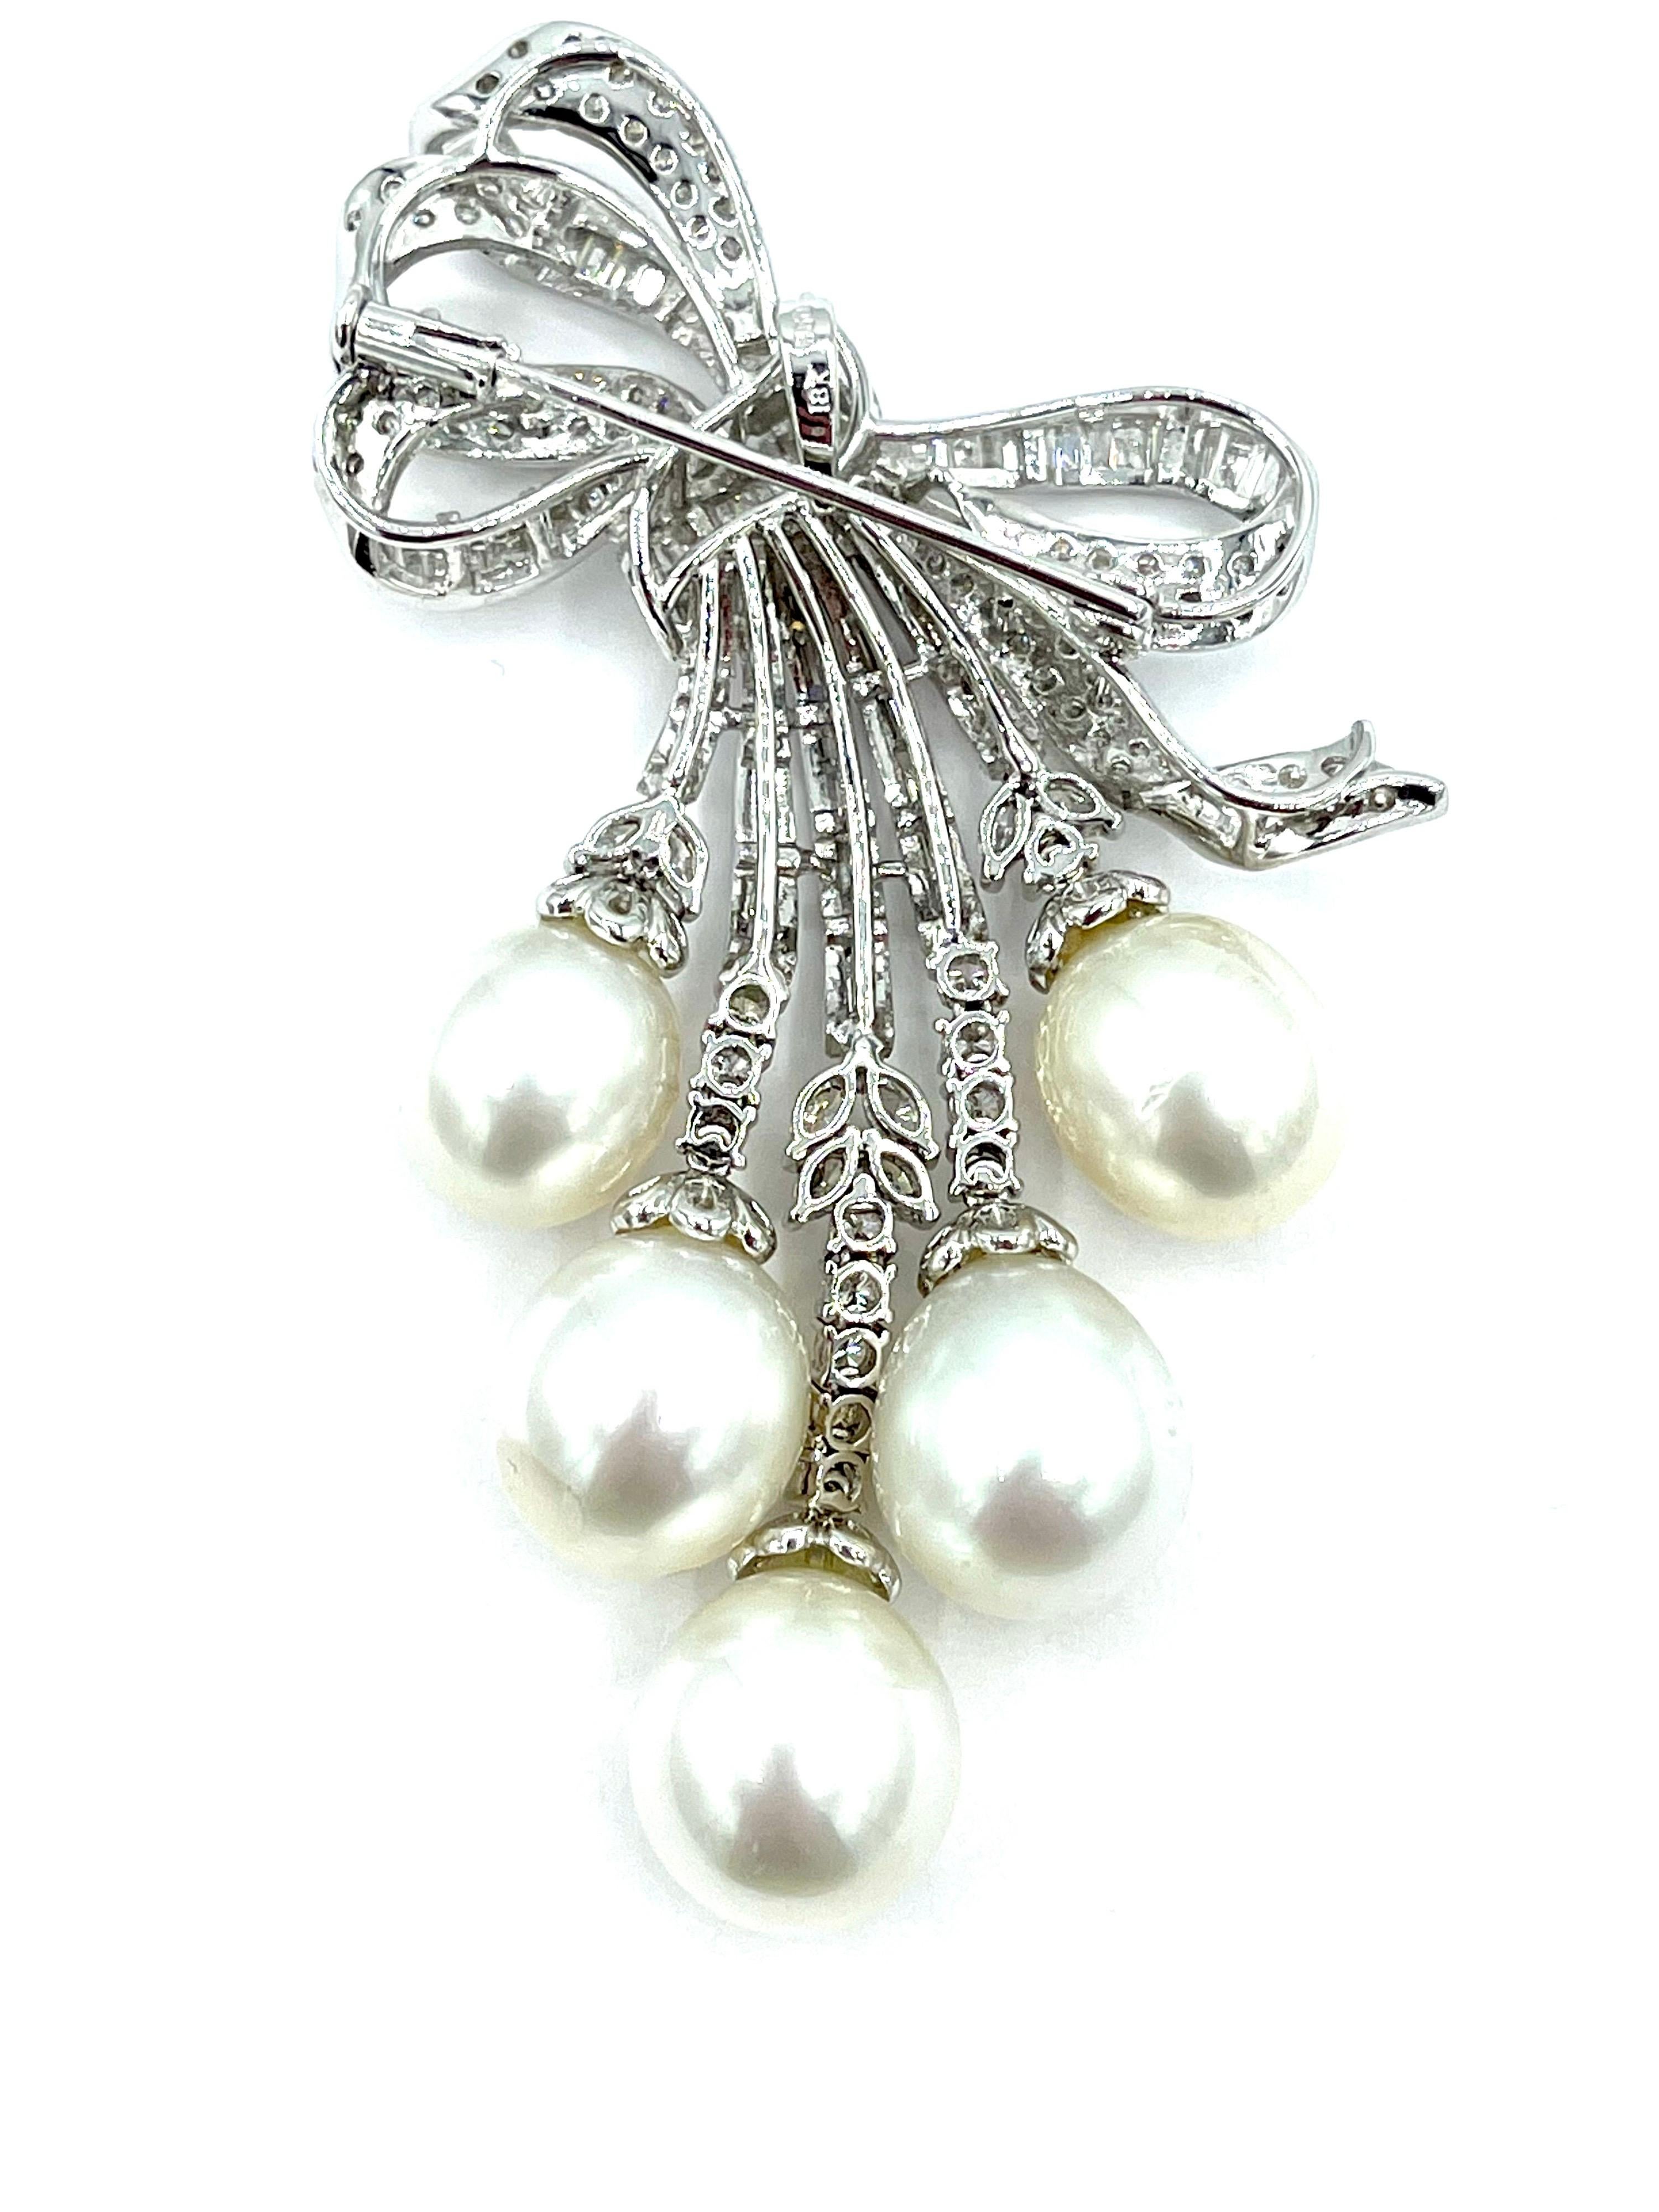 South Sea Pearl and Diamond 18k White Gold Pendant Brooch 2